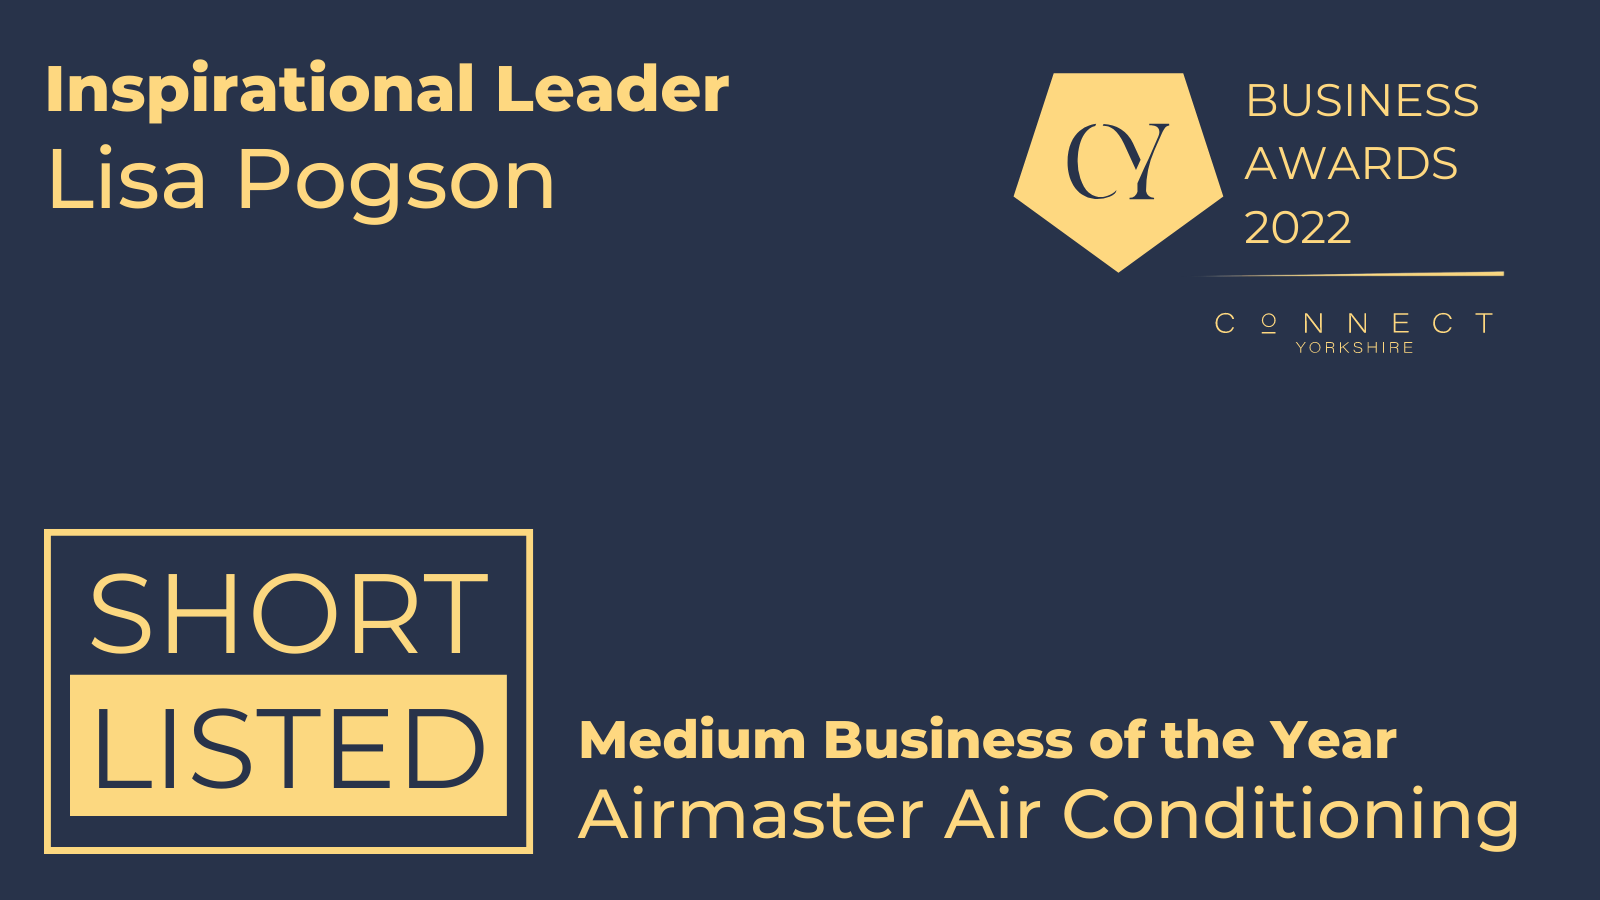 Thumbnail for Airmaster and MD, Lisa Pogson shortlisted at Connect Yorkshire Awards news article